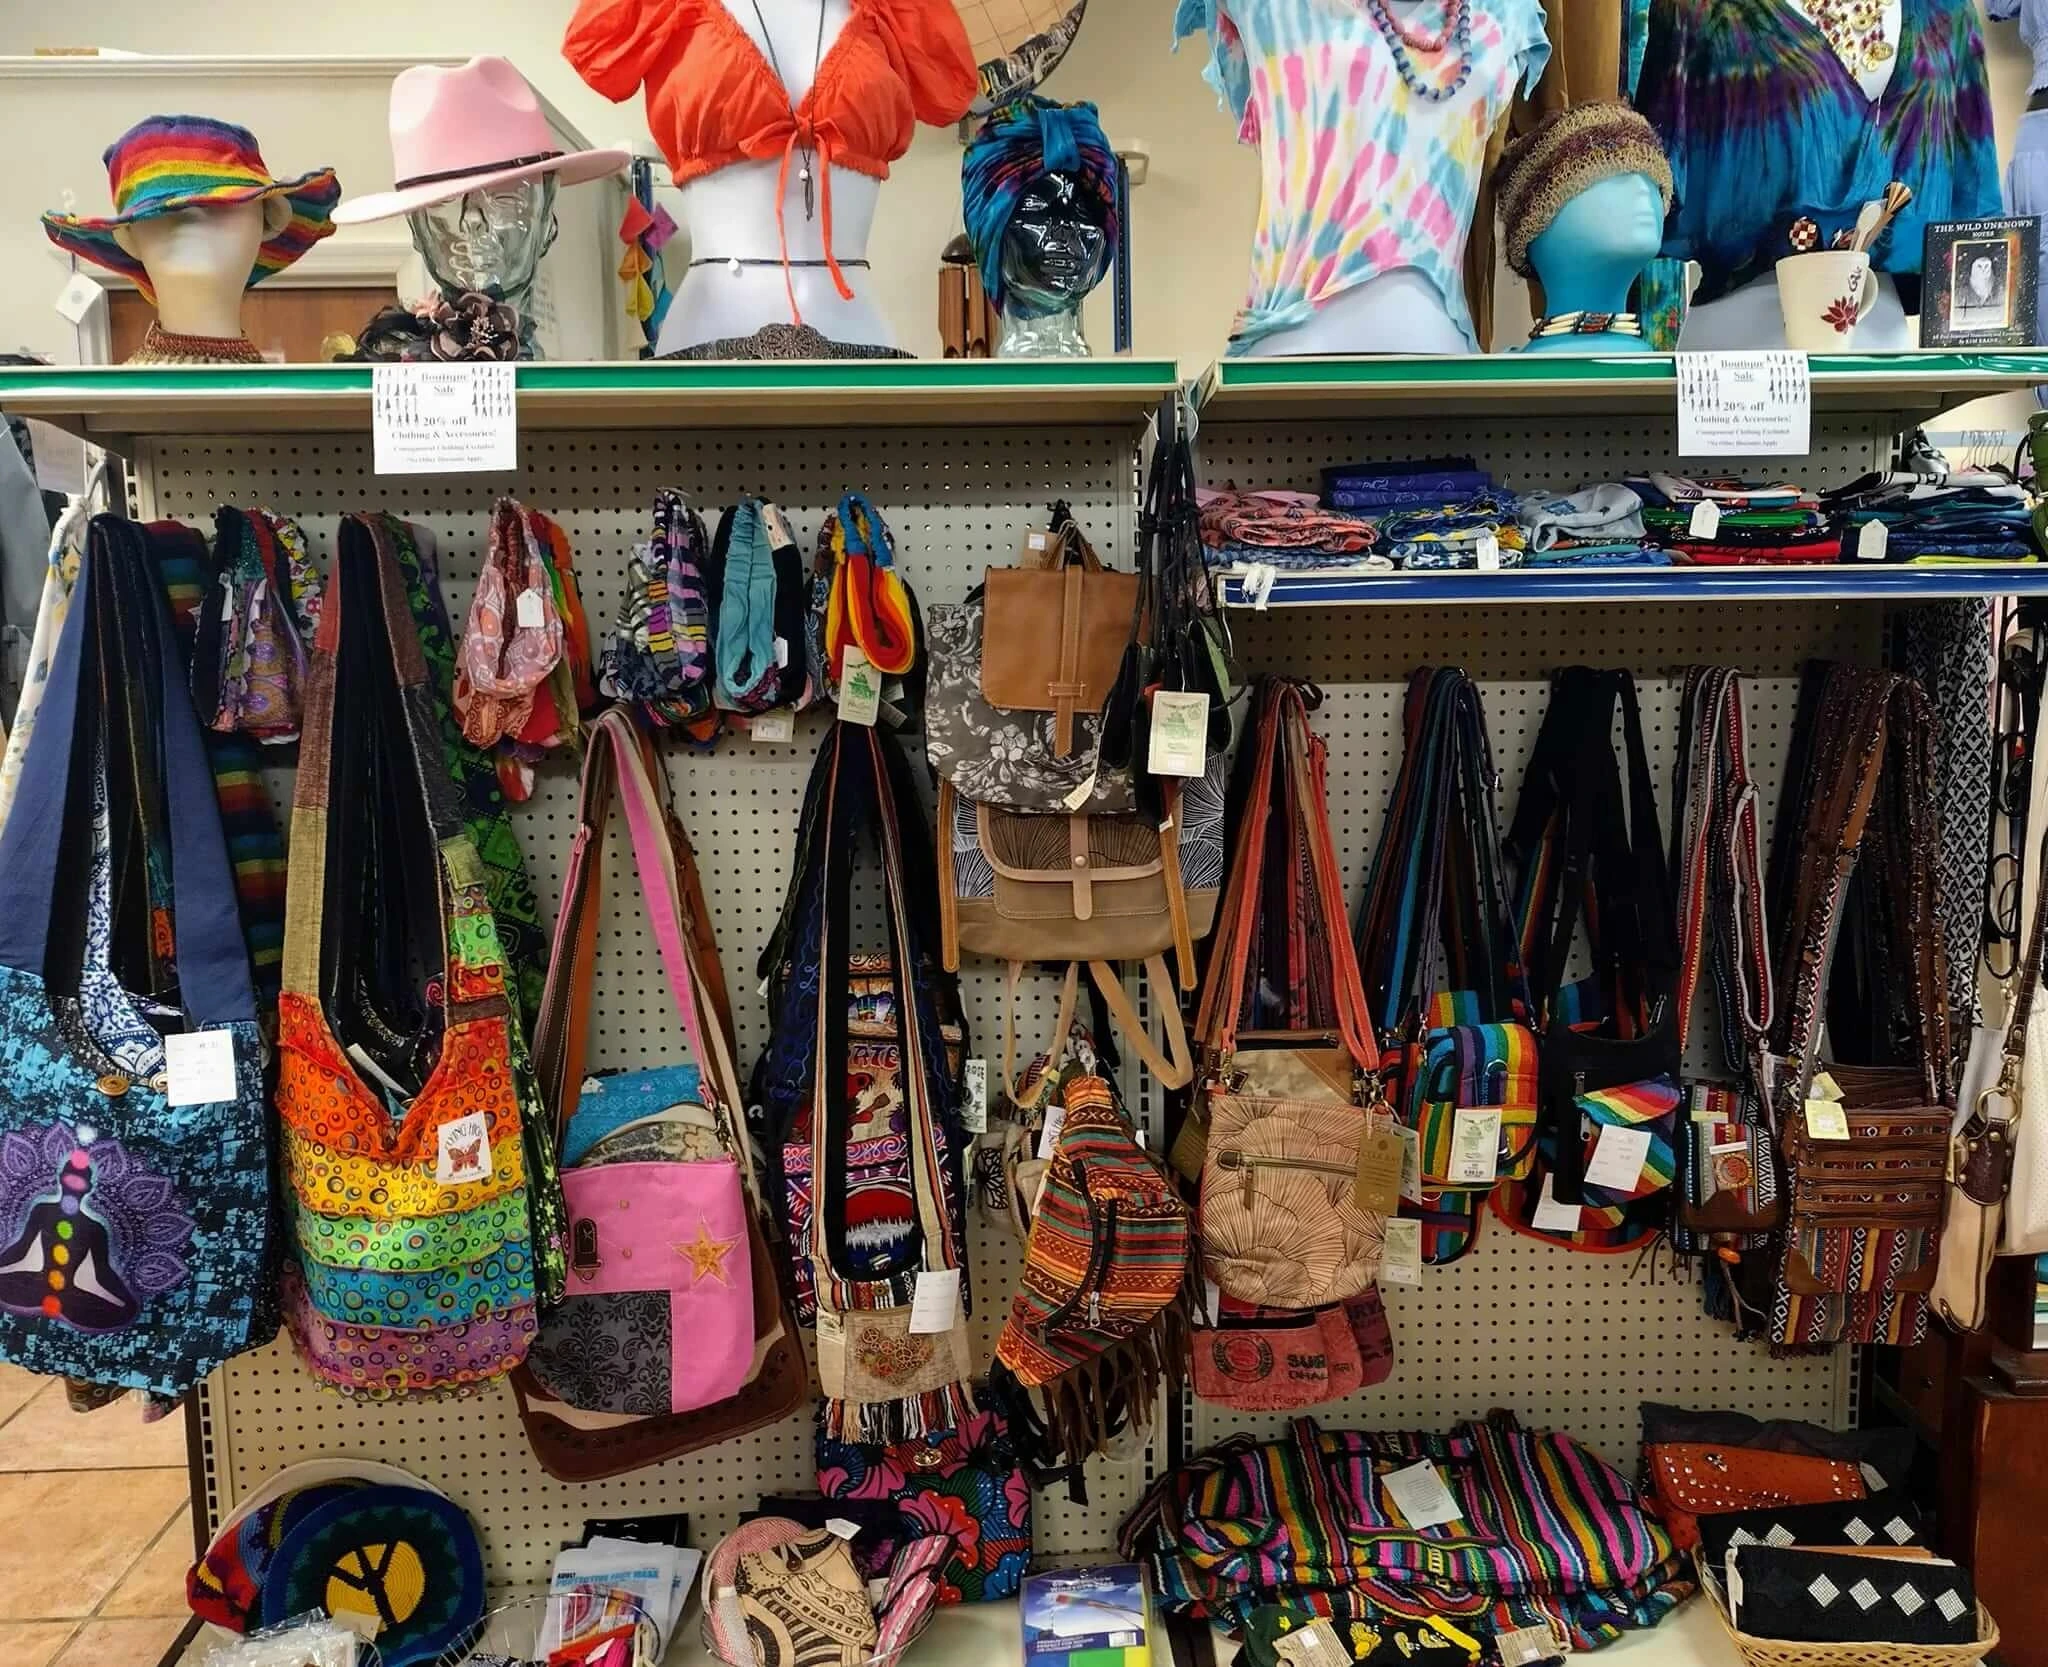 A display of various multicolored bags